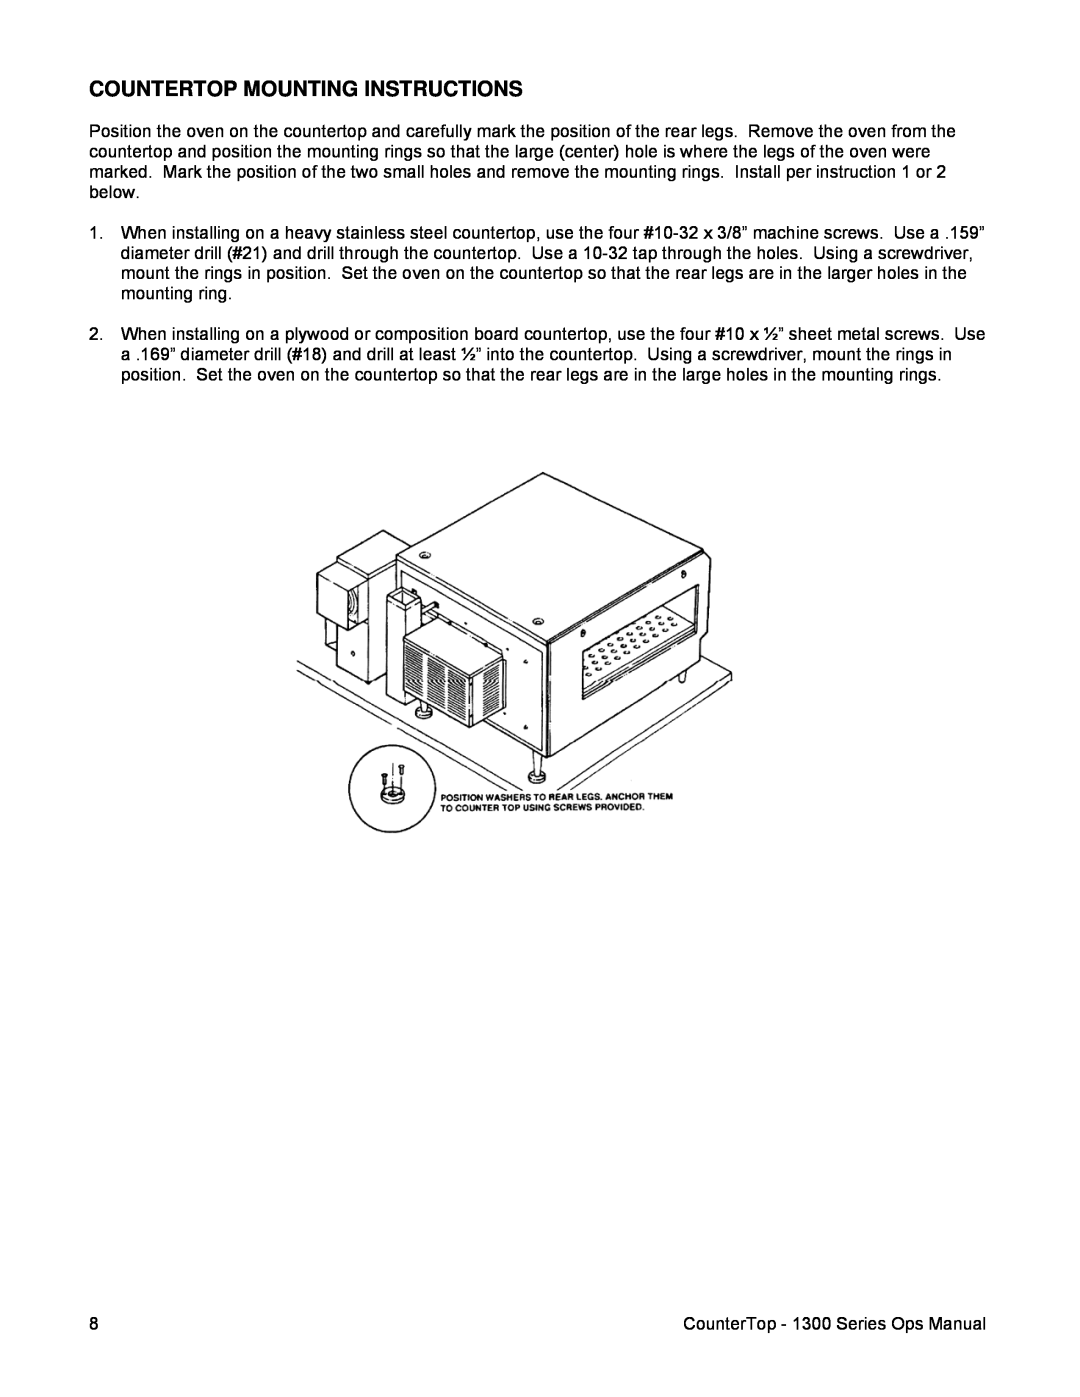 Lincoln 1300 operating instructions Countertop Mounting Instructions 